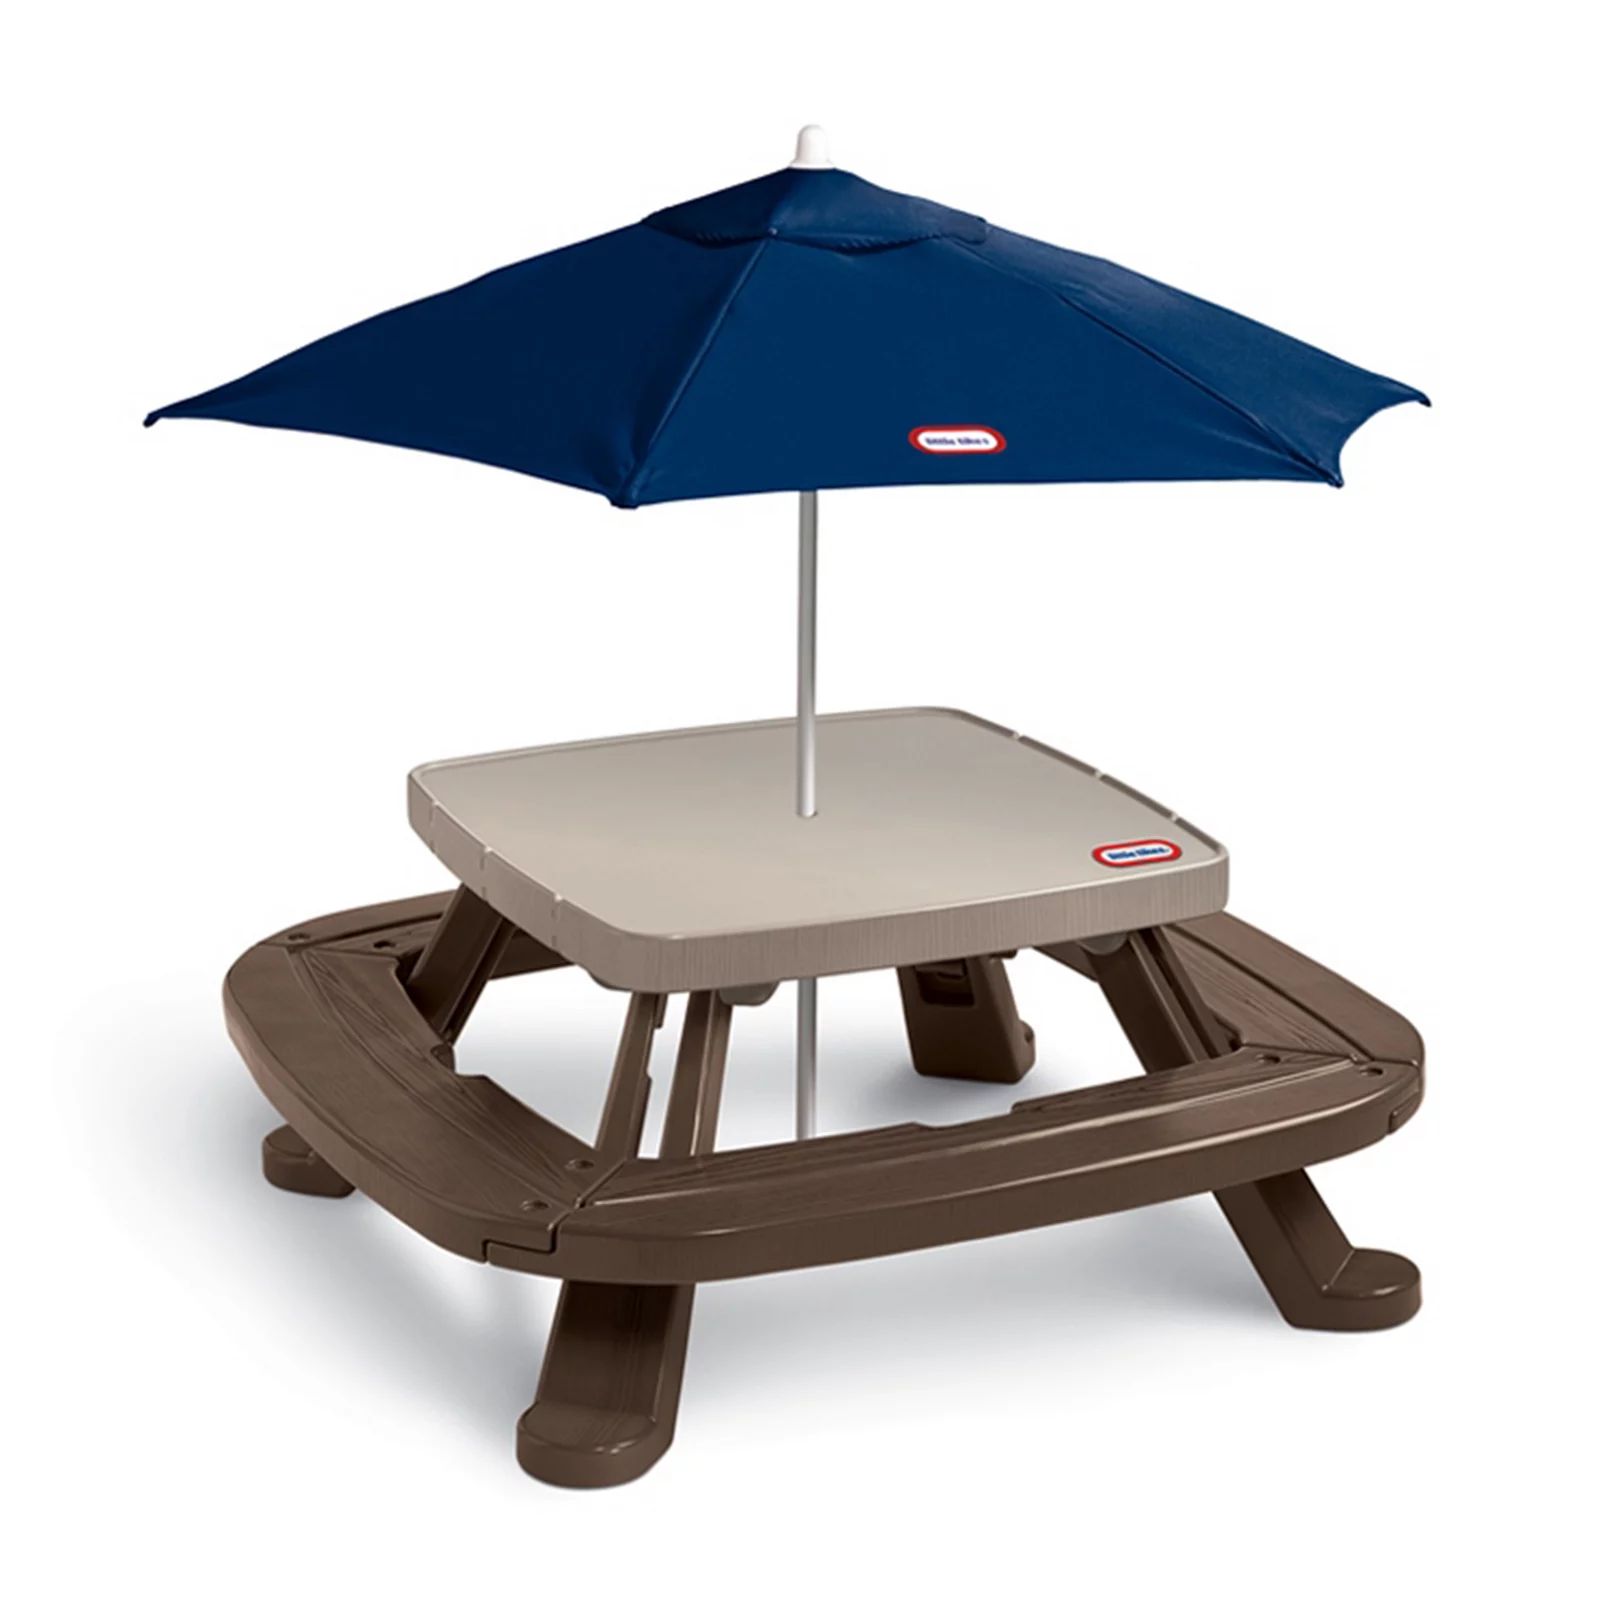 Little Tikes Fold 'n Store Picnic Table with Market Umbrella, Clrs | Kohl's